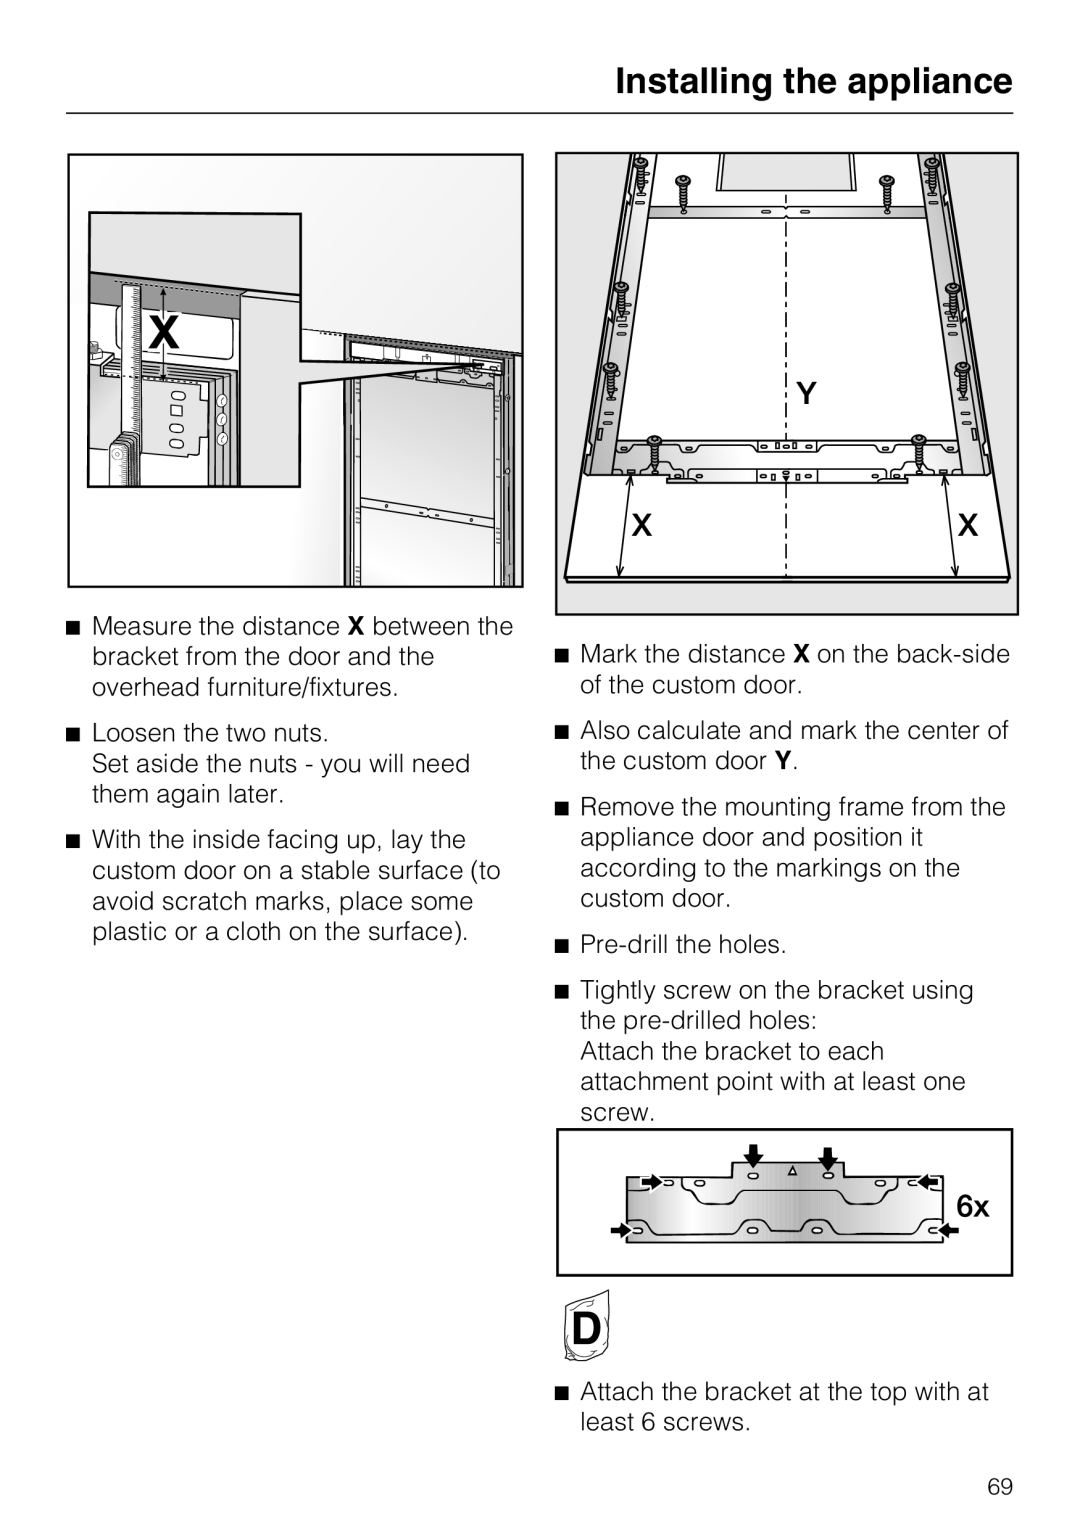 Miele F1471VI installation instructions Installing the appliance, Loosen the two nuts 